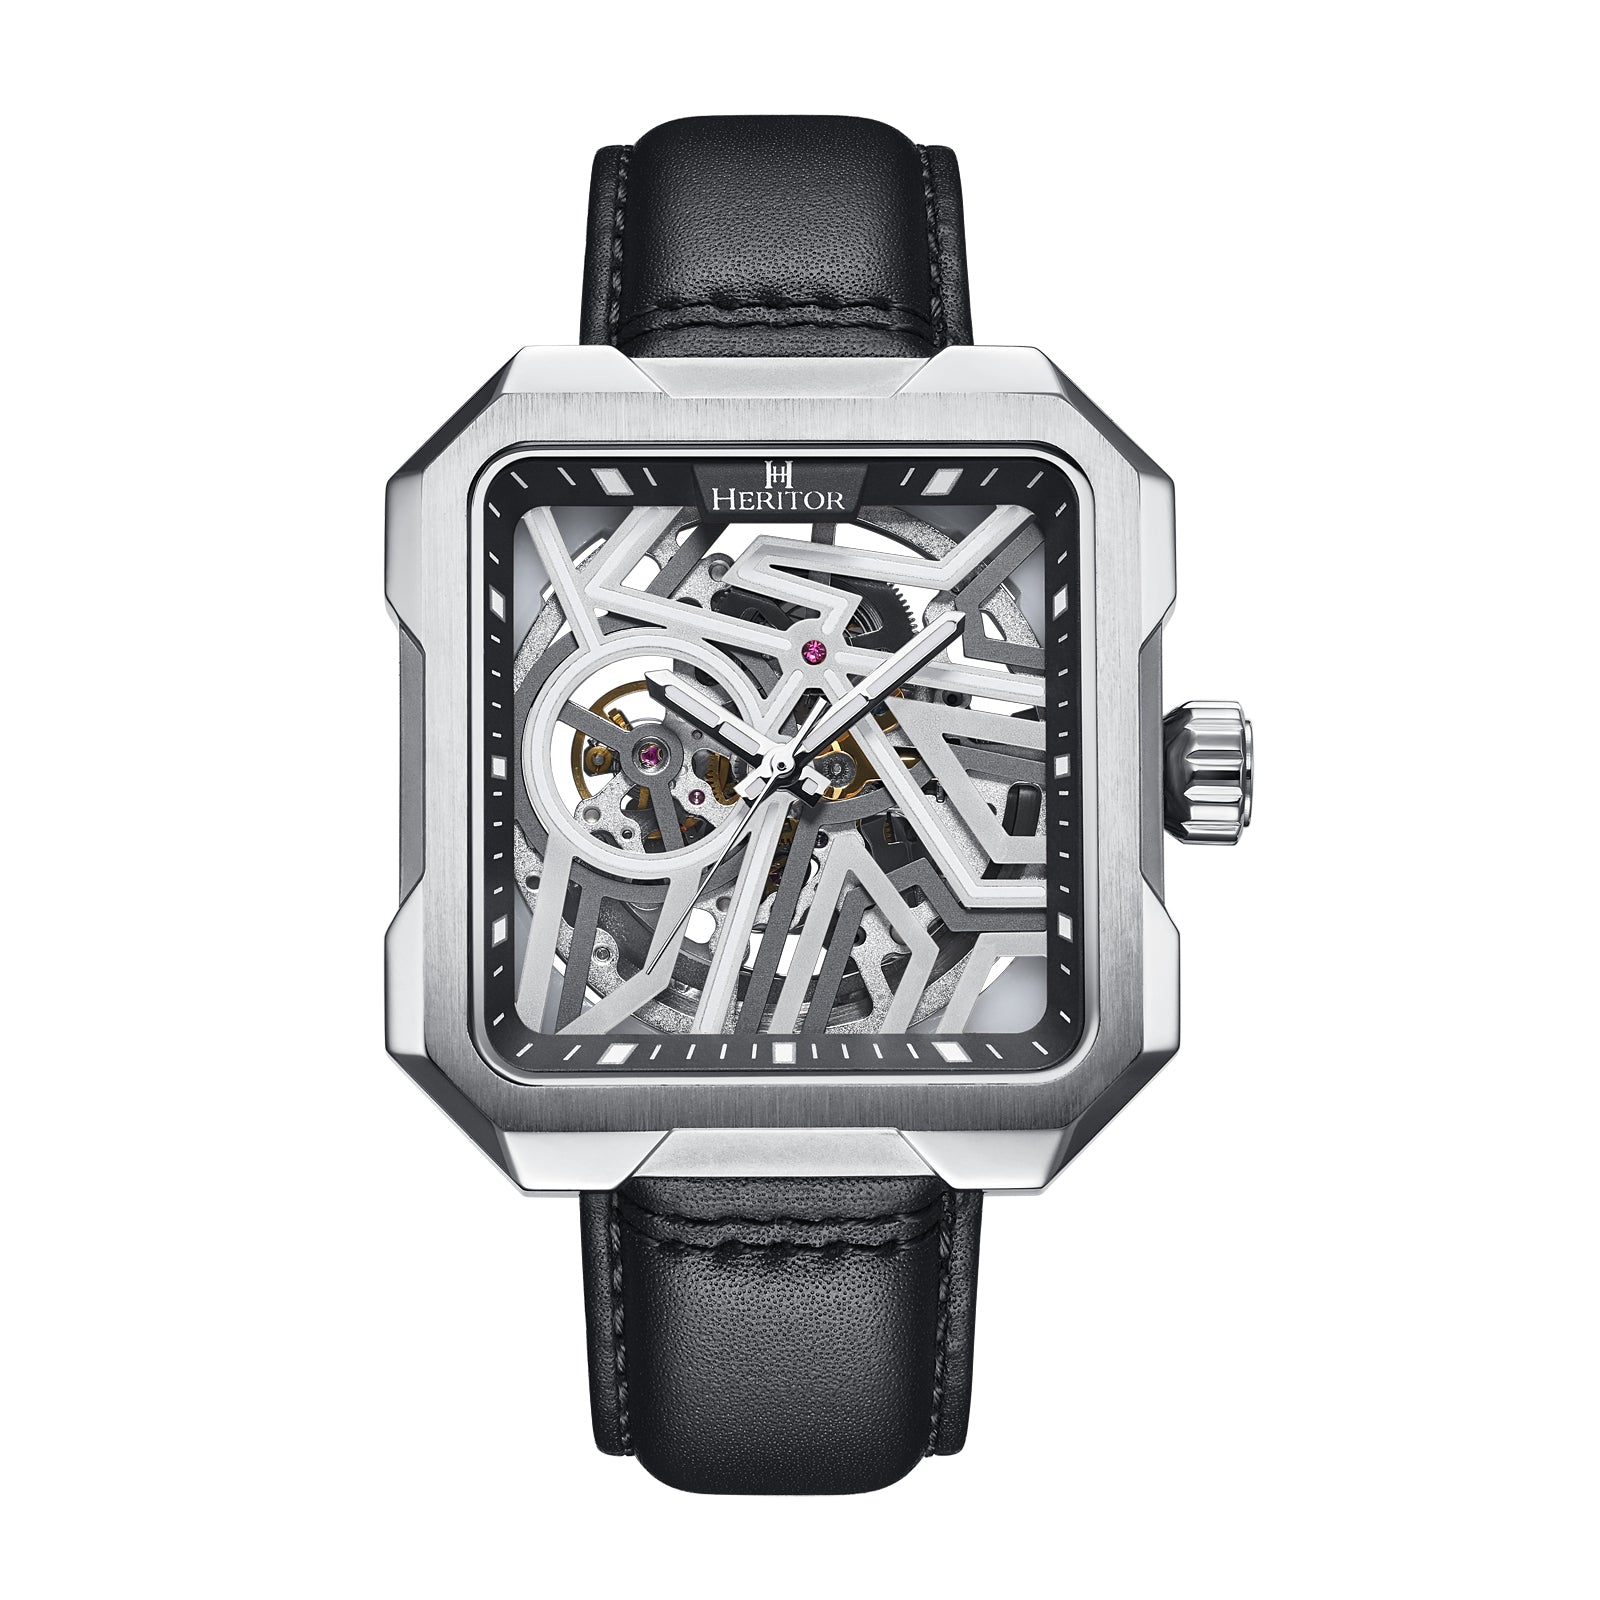 Men’s Black / Silver Campbell Leather-Band Skeleton Watch - Black, Silver Heritor Automatic